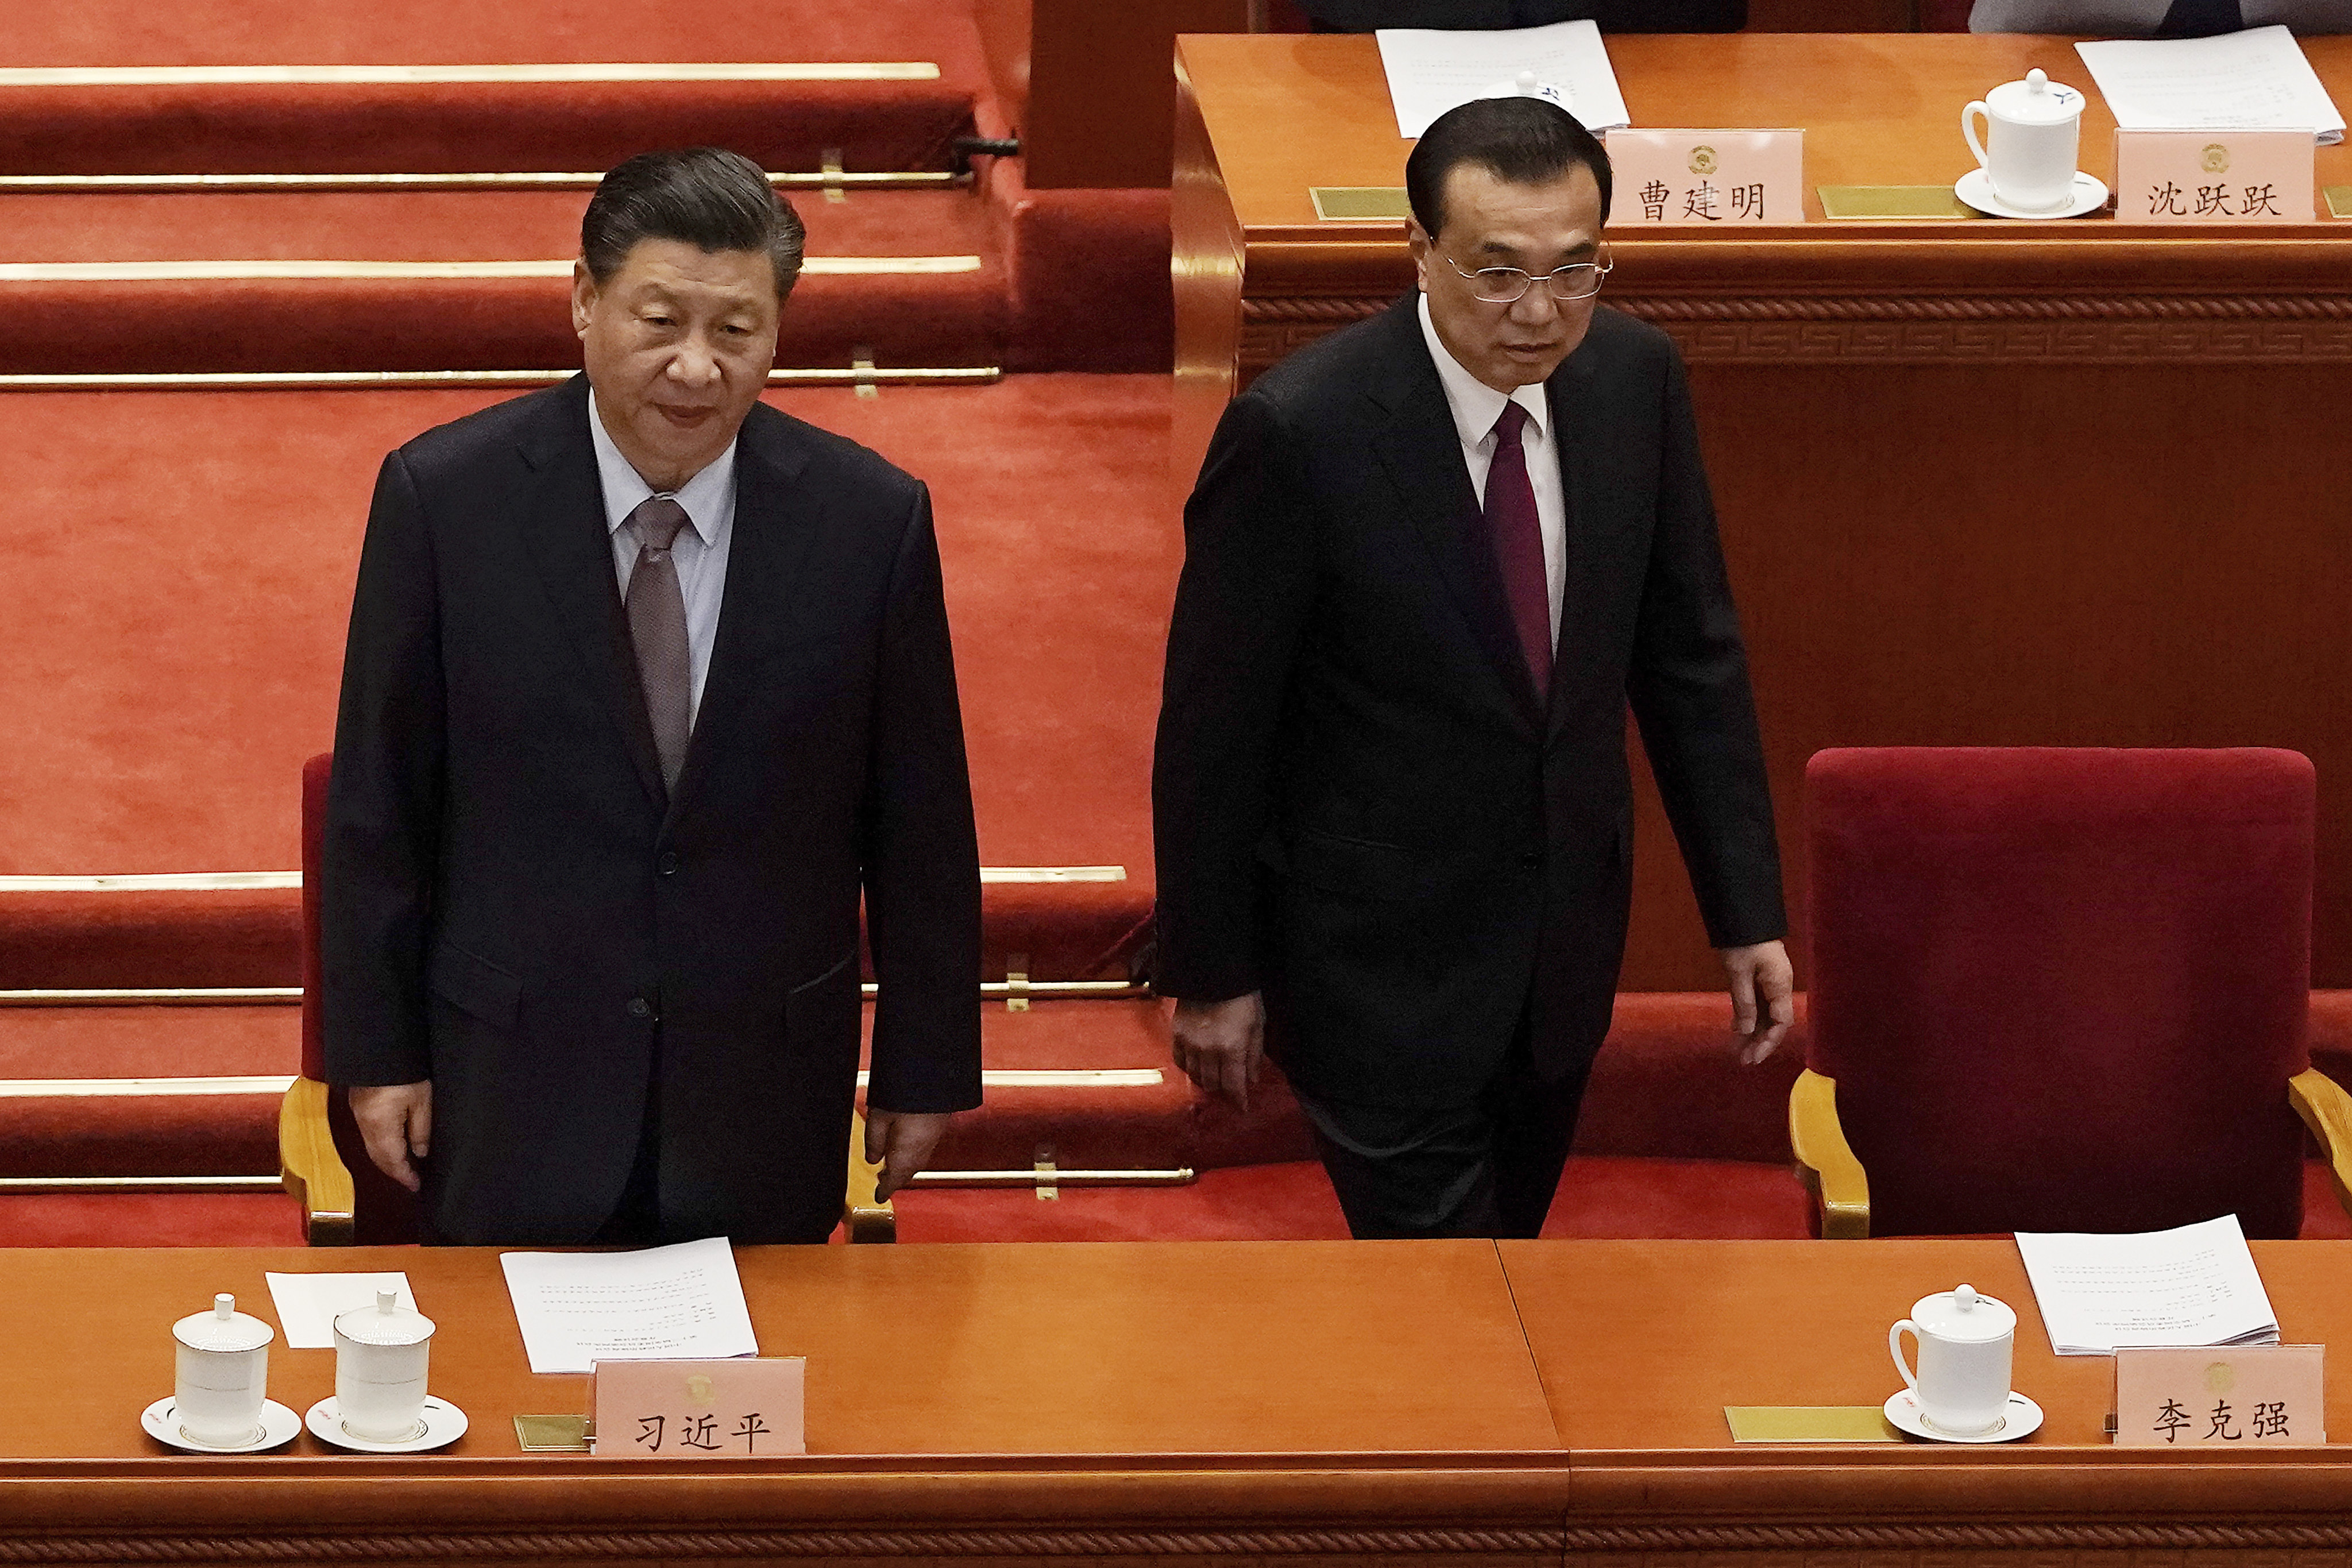 Chinese President Xi Jinping and Premier Li Keqiang arrive at the Great Hall of the People in Beijing for last year’s Chinese People’s Political Consultative Conference. Photo: AP